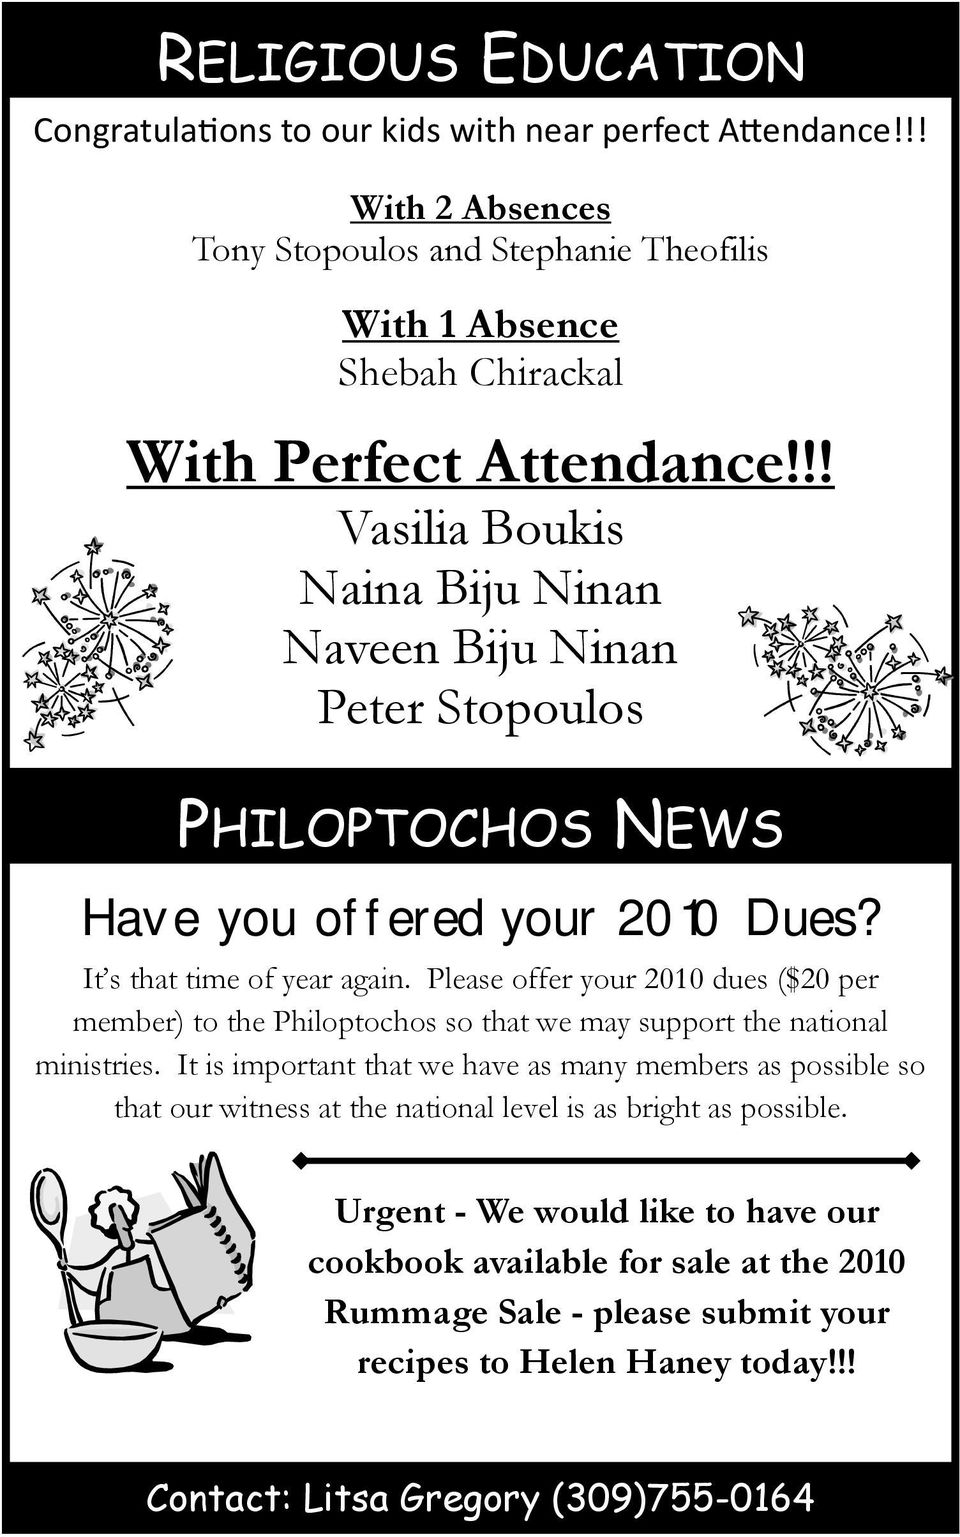 Please offer your 2010 dues ($20 per member) to the Philoptochos so that we may support the national ministries.